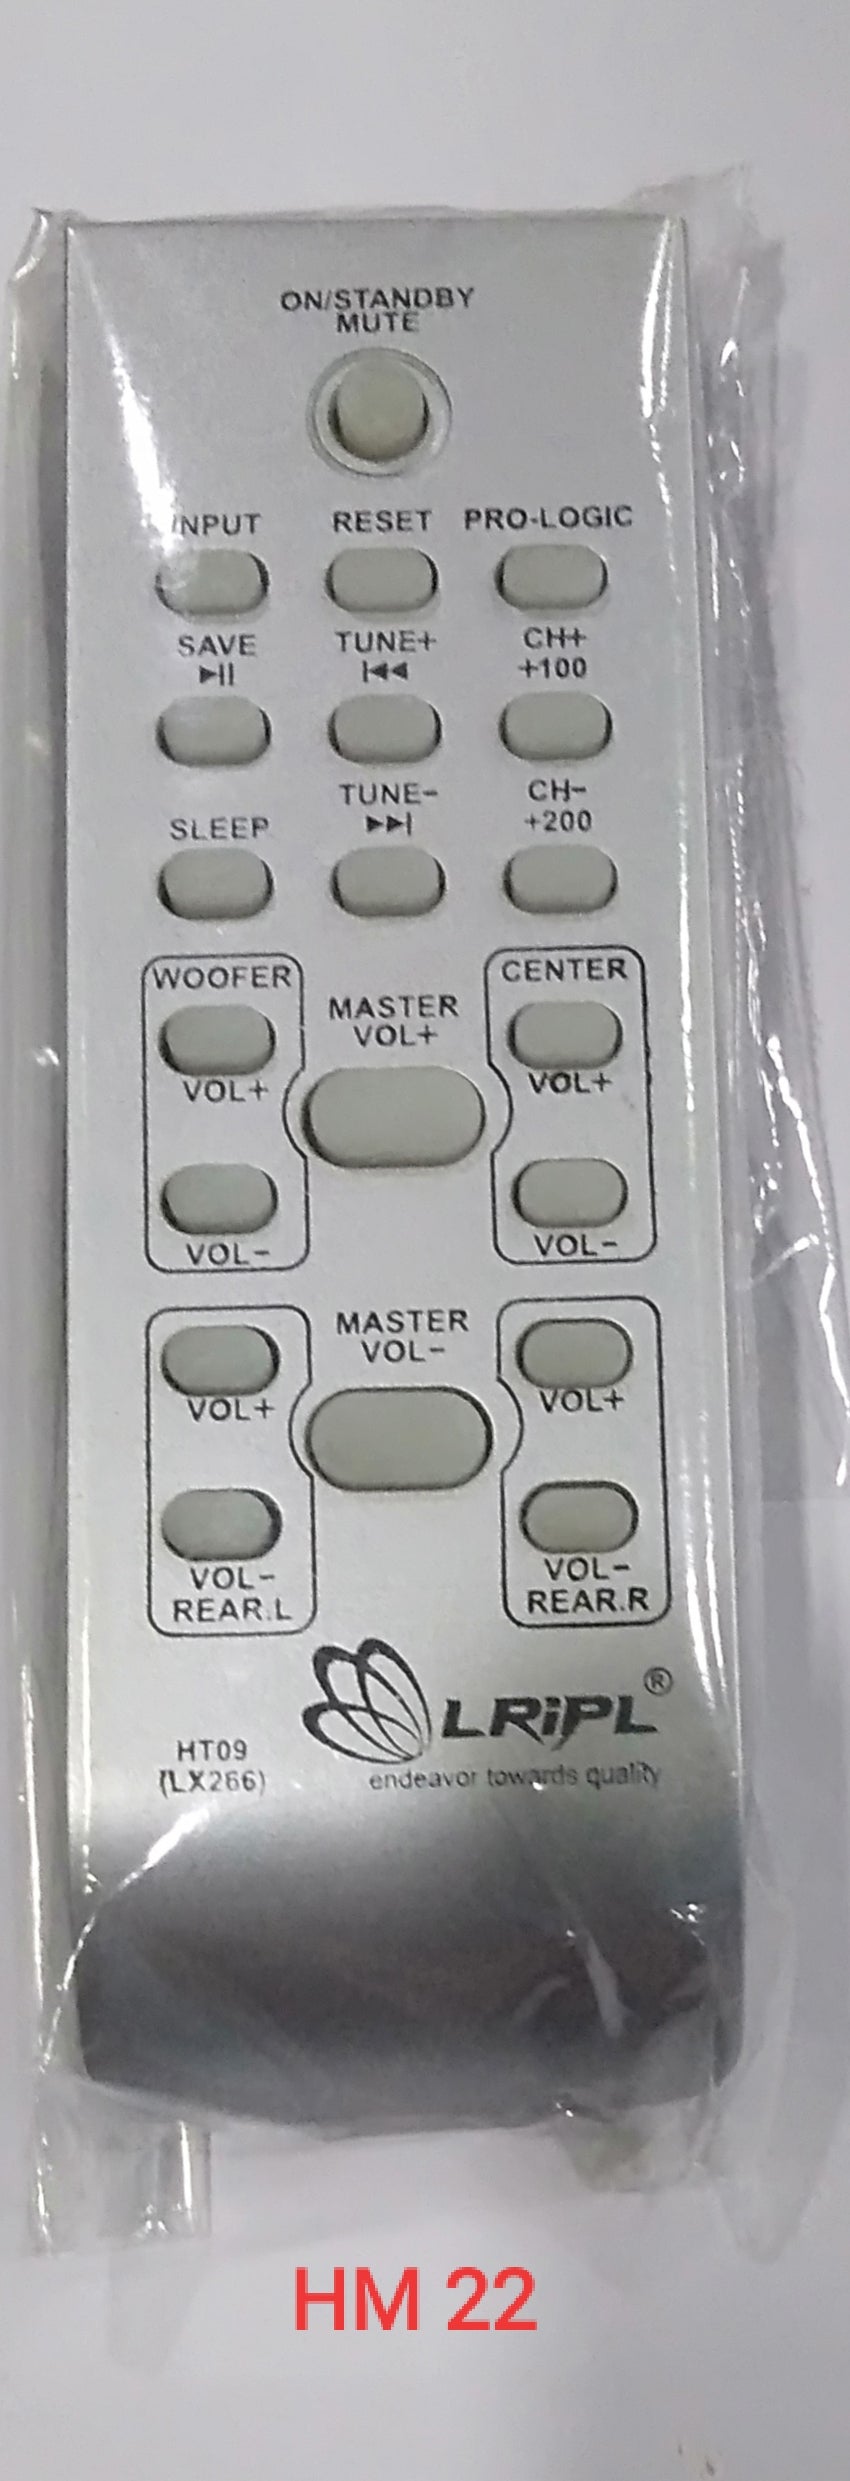 Universal Home Theater Remote Control Suitable for Ricardo, Impex, I-Bell (HM22) - Faritha